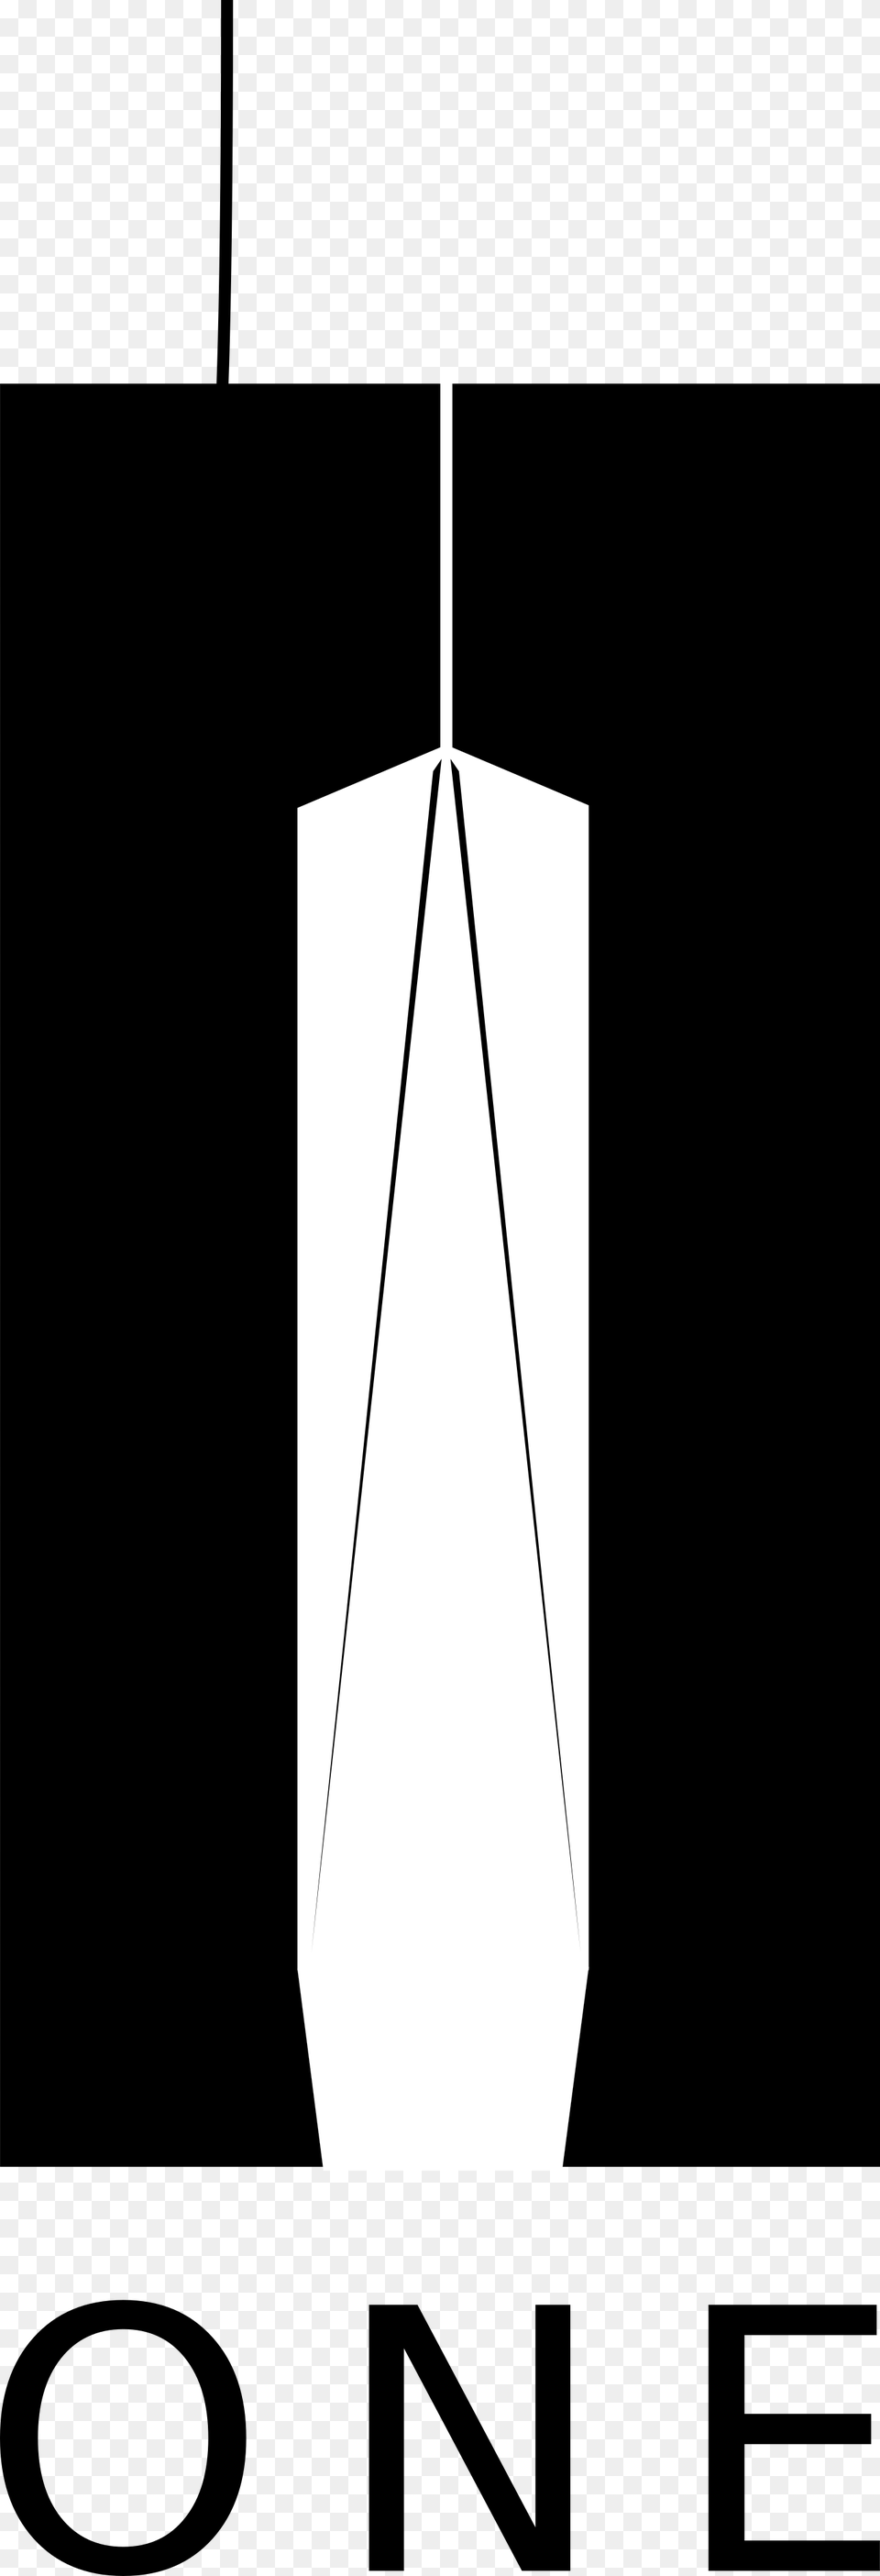 World Trade Center One, Lamp Png